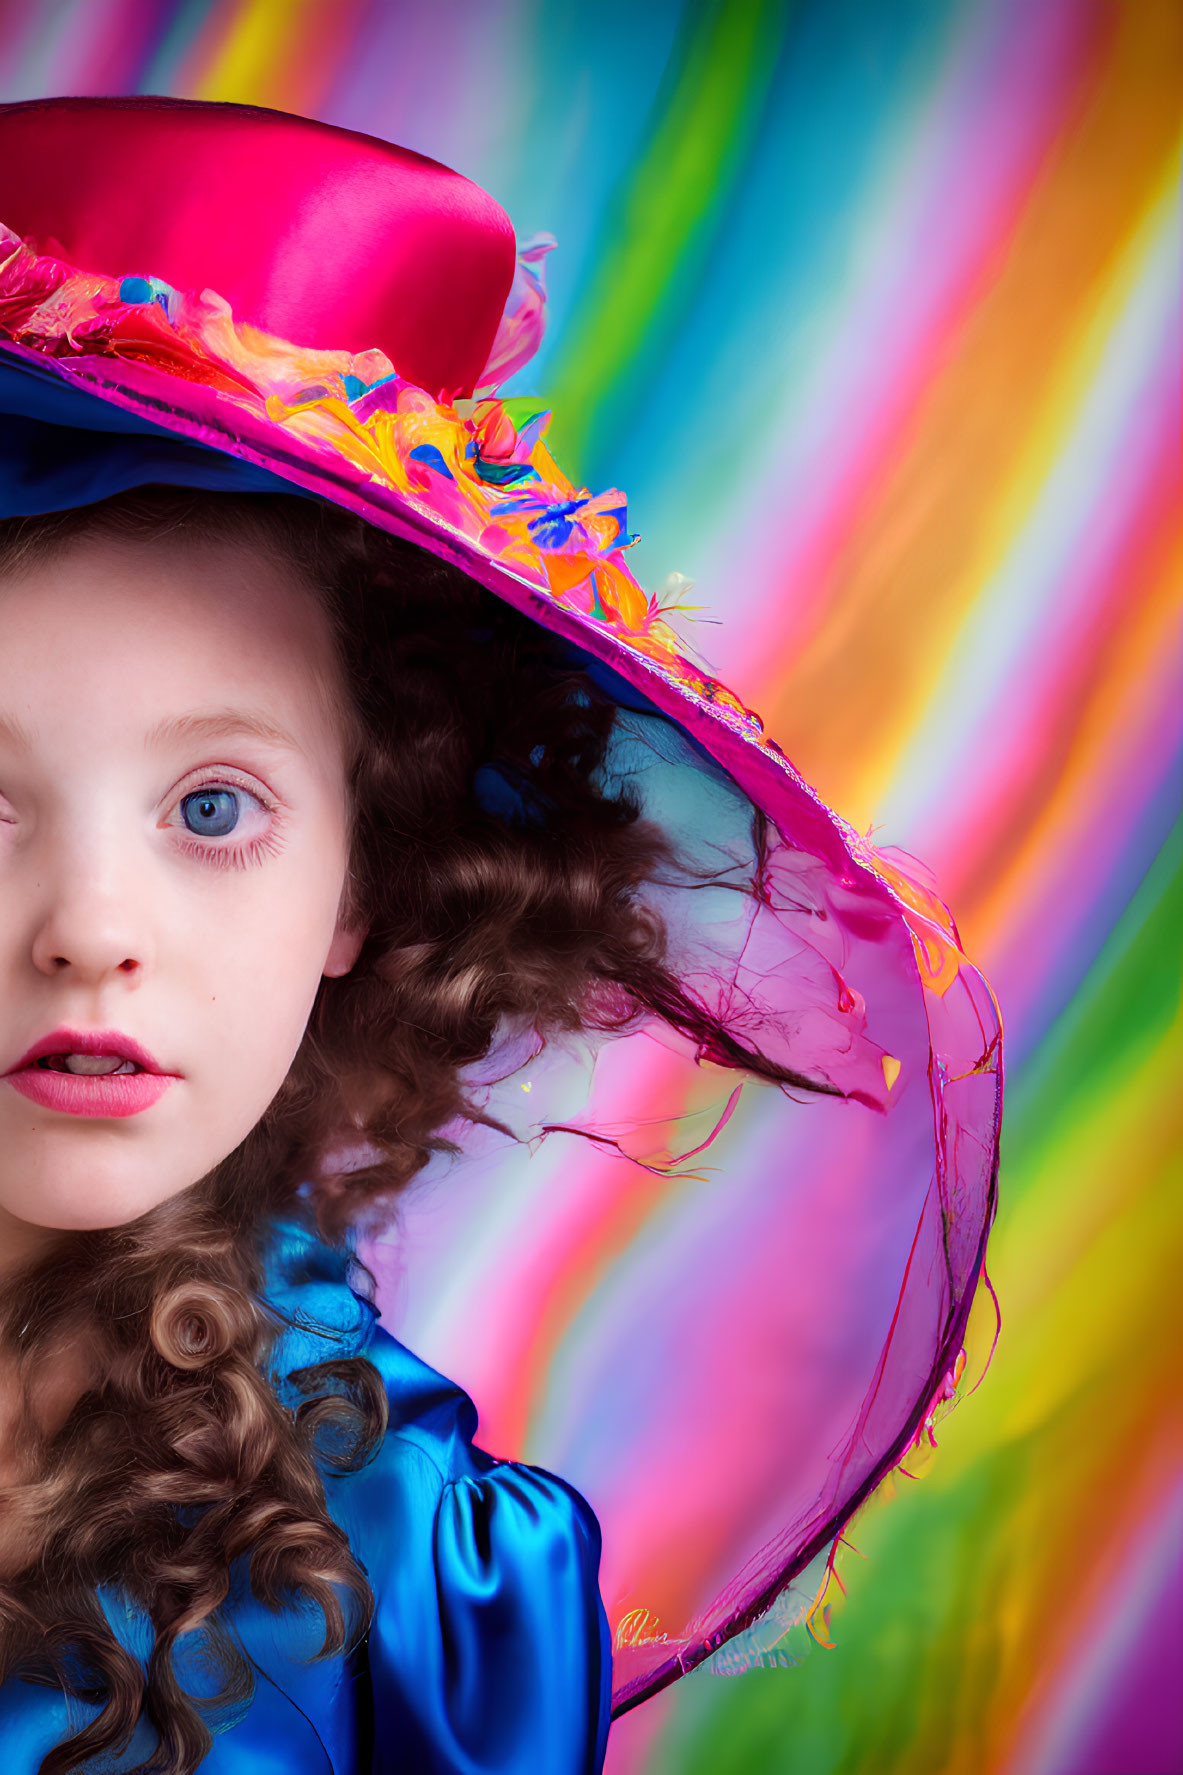 Child with Blue Eyes and Curly Hair in Fancy Outfit and Pink Feathered Hat on Rainbow Sw